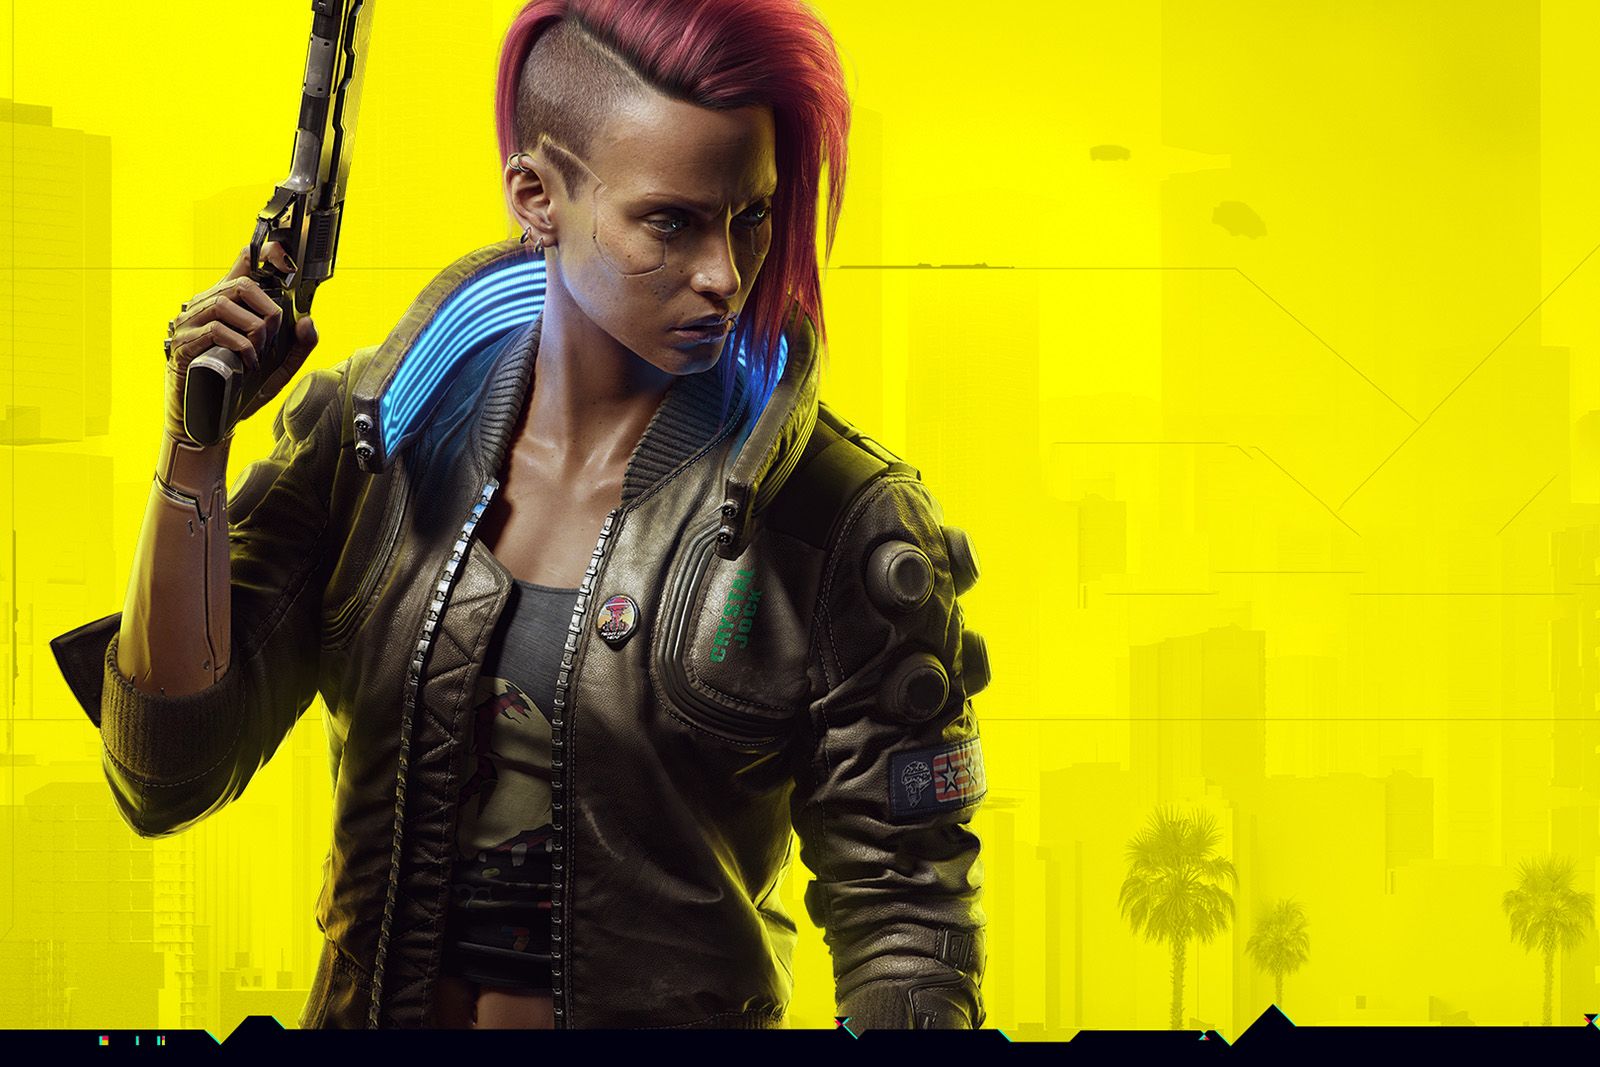 Cyberpunk 2077 heavily bugged on base PS4 and Xbox One, claim gamers photo 1